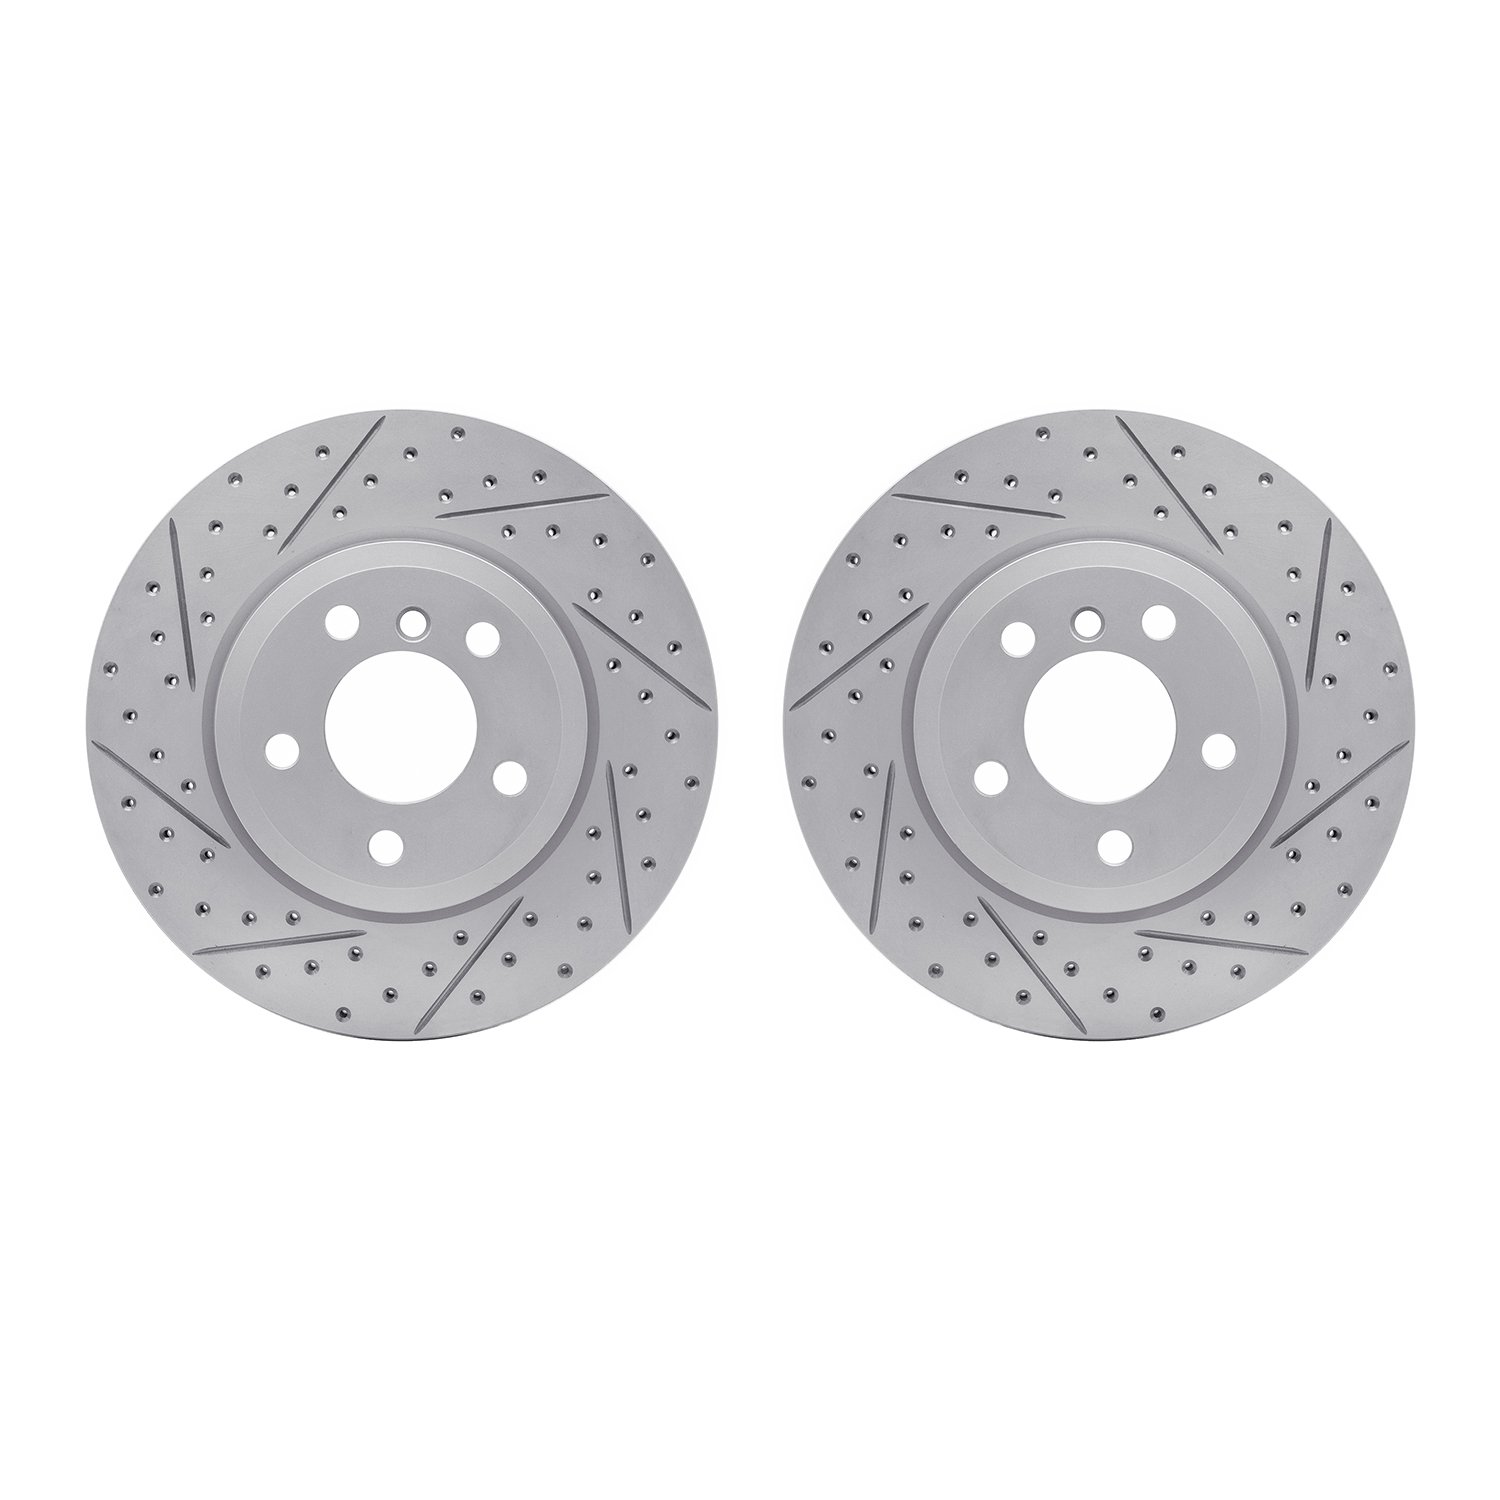 2002-31040 Geoperformance Drilled/Slotted Brake Rotors, 2004-2010 BMW, Position: Front